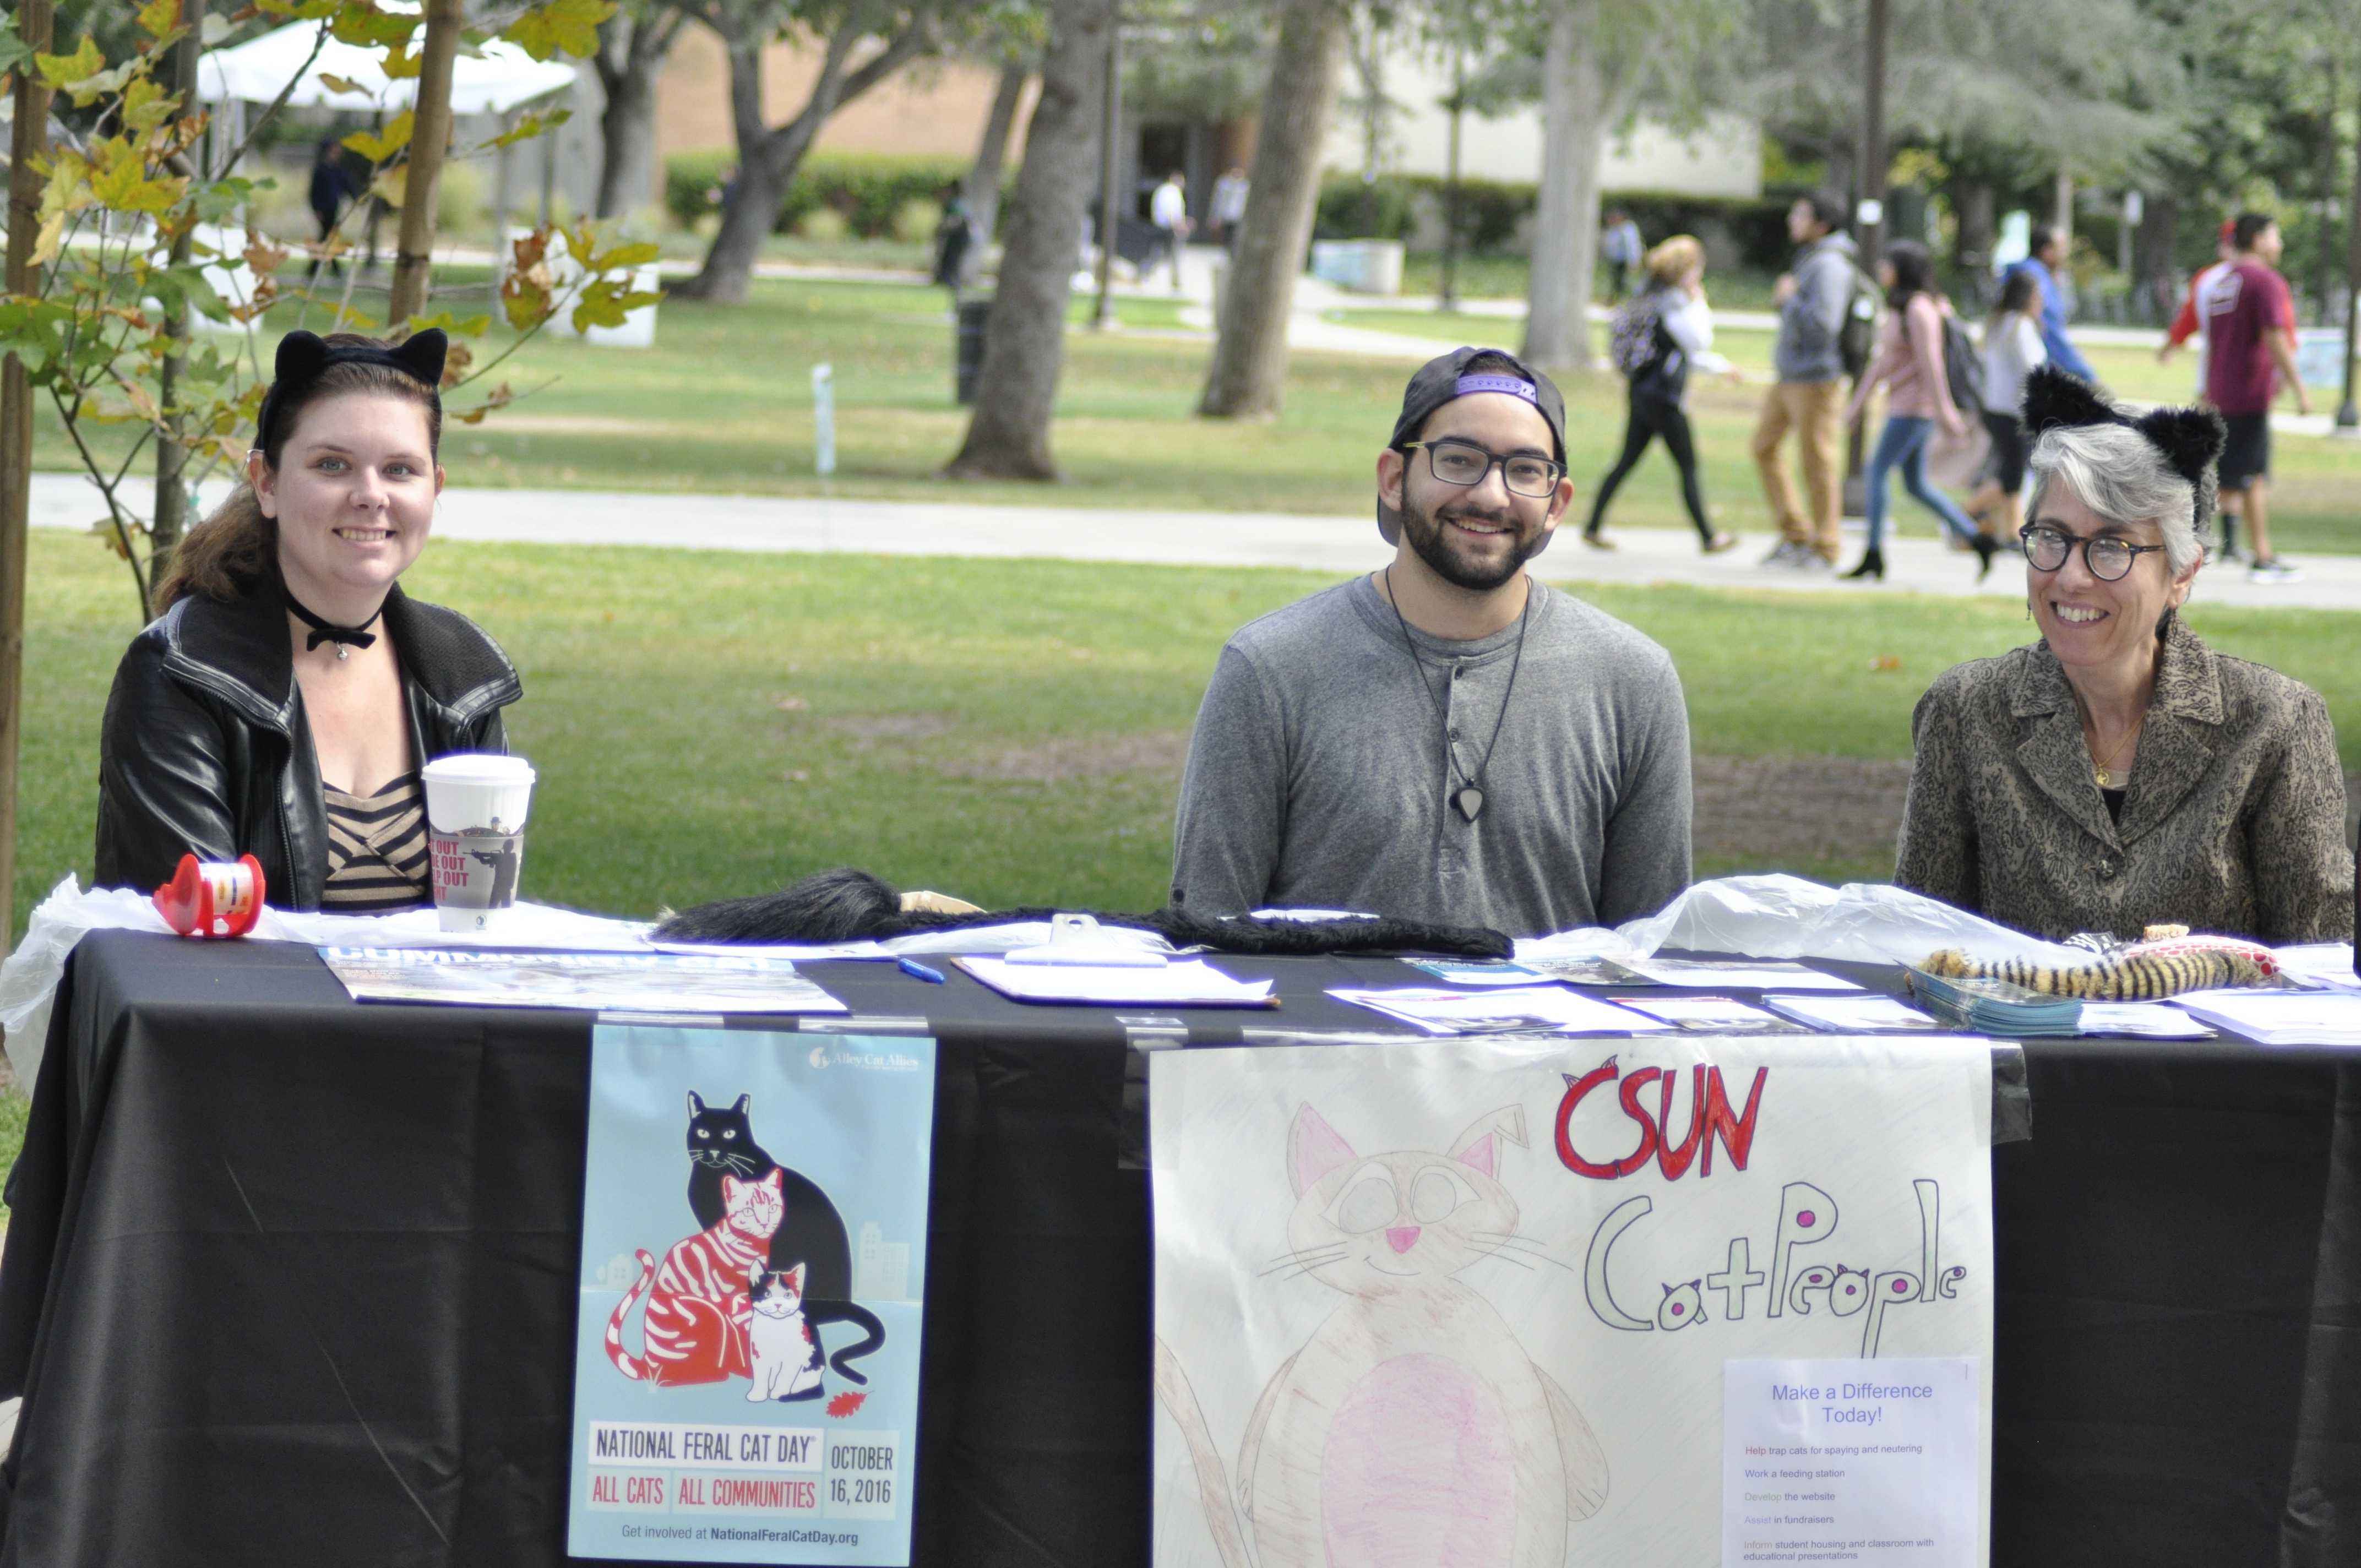 3 people sit at CSUN cat people booth